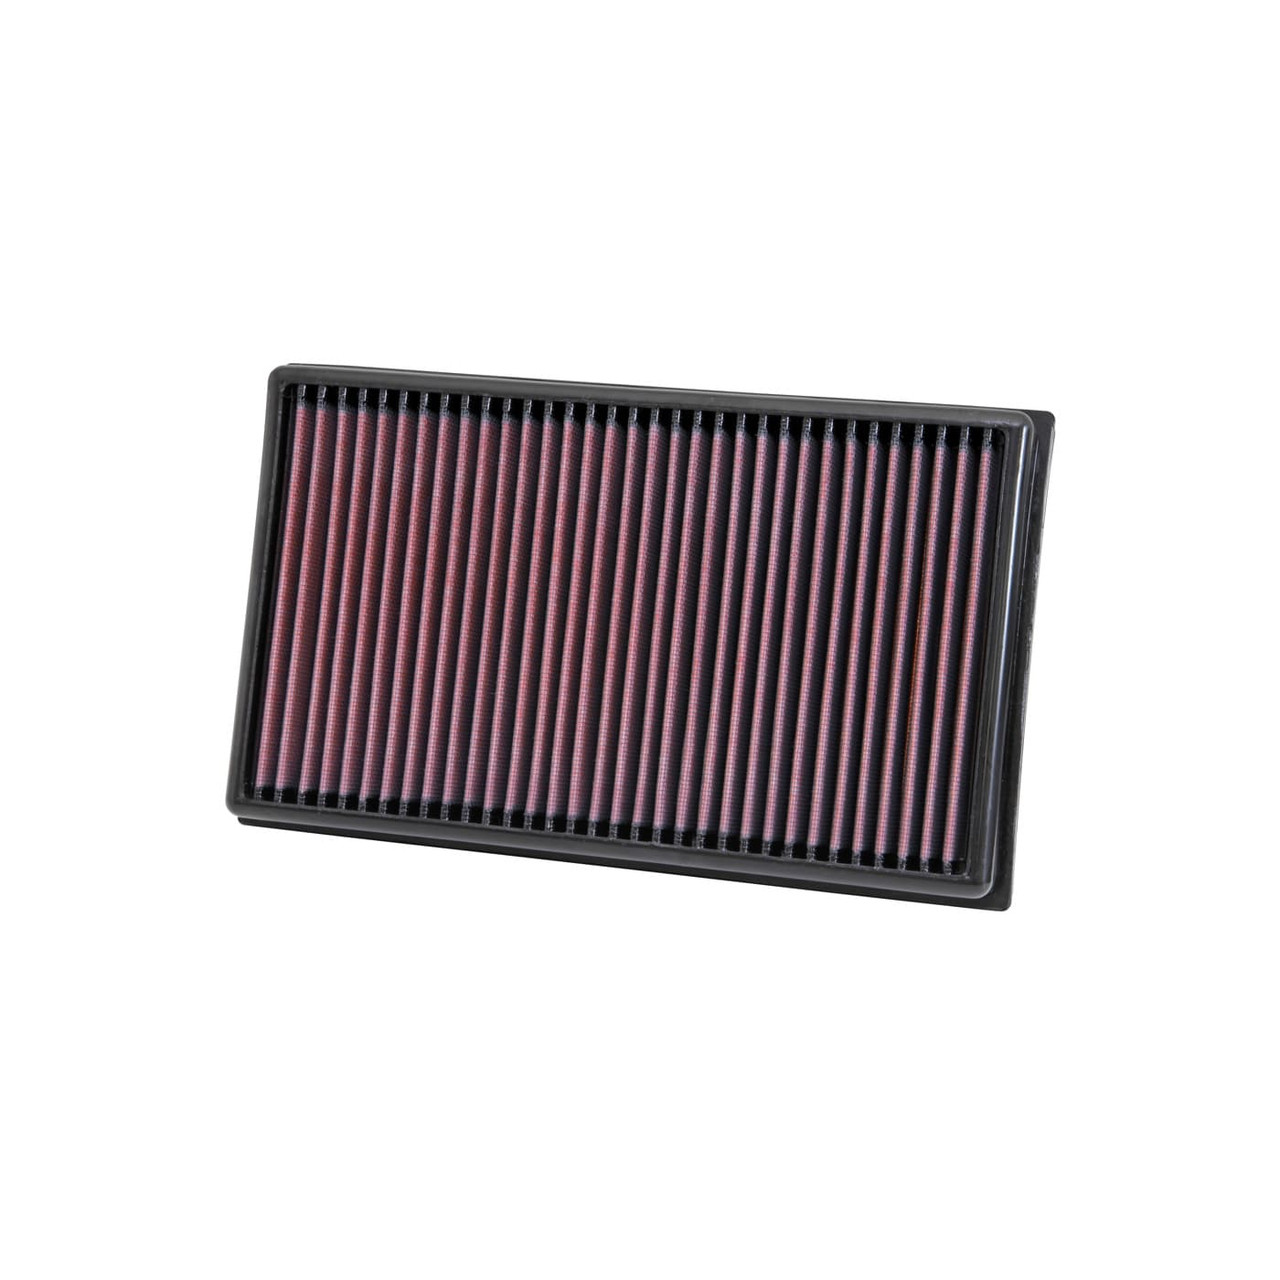 K&N Panel Filter - Golf Mk8 GTI, TCR, and R - Awesome GTI - Volkswagen Audi  Group Specialists